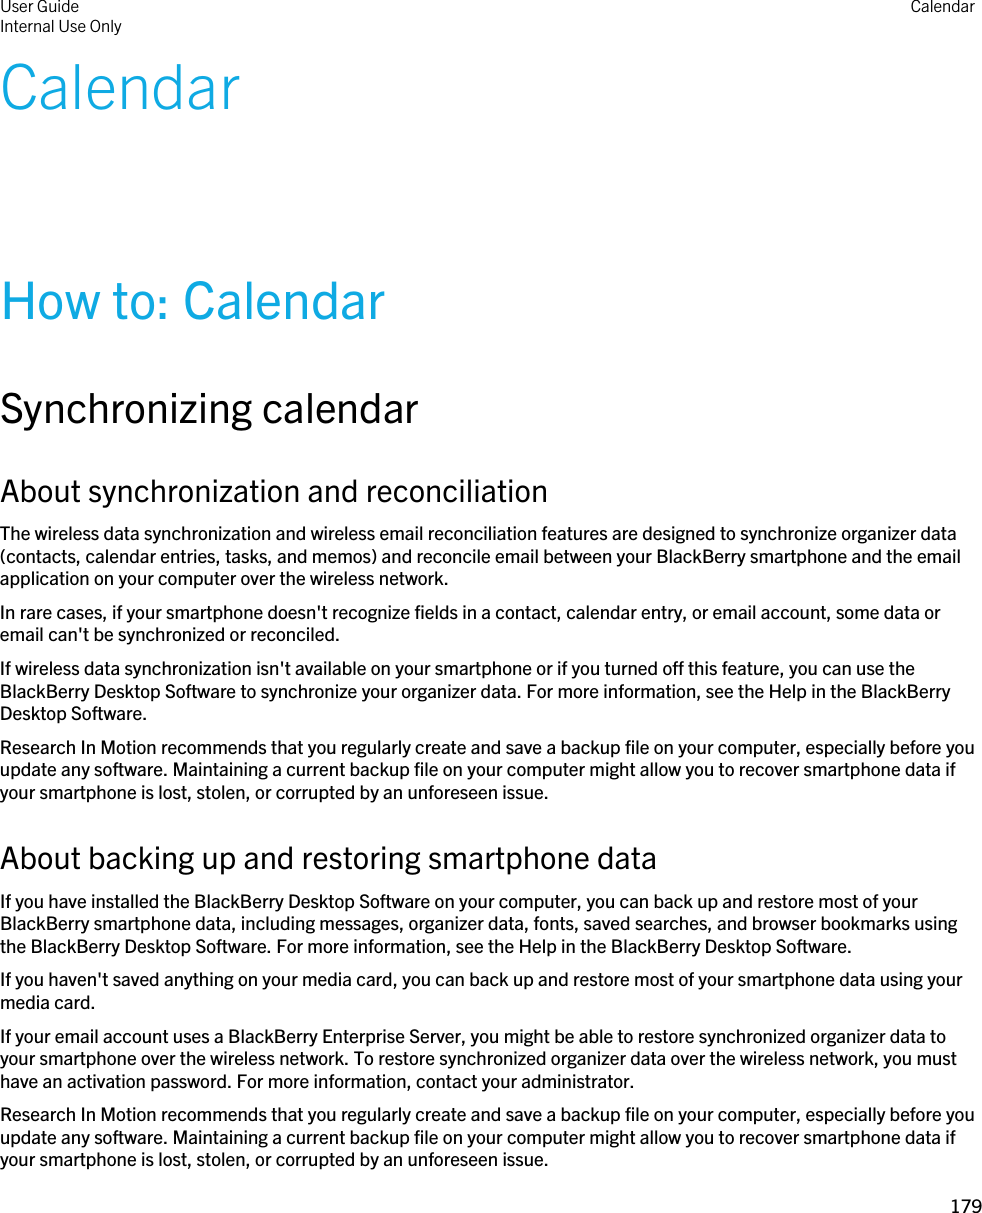 CalendarHow to: CalendarSynchronizing calendarAbout synchronization and reconciliationThe wireless data synchronization and wireless email reconciliation features are designed to synchronize organizer data (contacts, calendar entries, tasks, and memos) and reconcile email between your BlackBerry smartphone and the email application on your computer over the wireless network.In rare cases, if your smartphone doesn&apos;t recognize fields in a contact, calendar entry, or email account, some data or email can&apos;t be synchronized or reconciled.If wireless data synchronization isn&apos;t available on your smartphone or if you turned off this feature, you can use the BlackBerry Desktop Software to synchronize your organizer data. For more information, see the Help in the BlackBerry Desktop Software.Research In Motion recommends that you regularly create and save a backup file on your computer, especially before you update any software. Maintaining a current backup file on your computer might allow you to recover smartphone data if your smartphone is lost, stolen, or corrupted by an unforeseen issue.About backing up and restoring smartphone dataIf you have installed the BlackBerry Desktop Software on your computer, you can back up and restore most of your BlackBerry smartphone data, including messages, organizer data, fonts, saved searches, and browser bookmarks using the BlackBerry Desktop Software. For more information, see the Help in the BlackBerry Desktop Software.If you haven&apos;t saved anything on your media card, you can back up and restore most of your smartphone data using your media card.If your email account uses a BlackBerry Enterprise Server, you might be able to restore synchronized organizer data to your smartphone over the wireless network. To restore synchronized organizer data over the wireless network, you must have an activation password. For more information, contact your administrator.Research In Motion recommends that you regularly create and save a backup file on your computer, especially before you update any software. Maintaining a current backup file on your computer might allow you to recover smartphone data if your smartphone is lost, stolen, or corrupted by an unforeseen issue.User GuideInternal Use Only Calendar179 